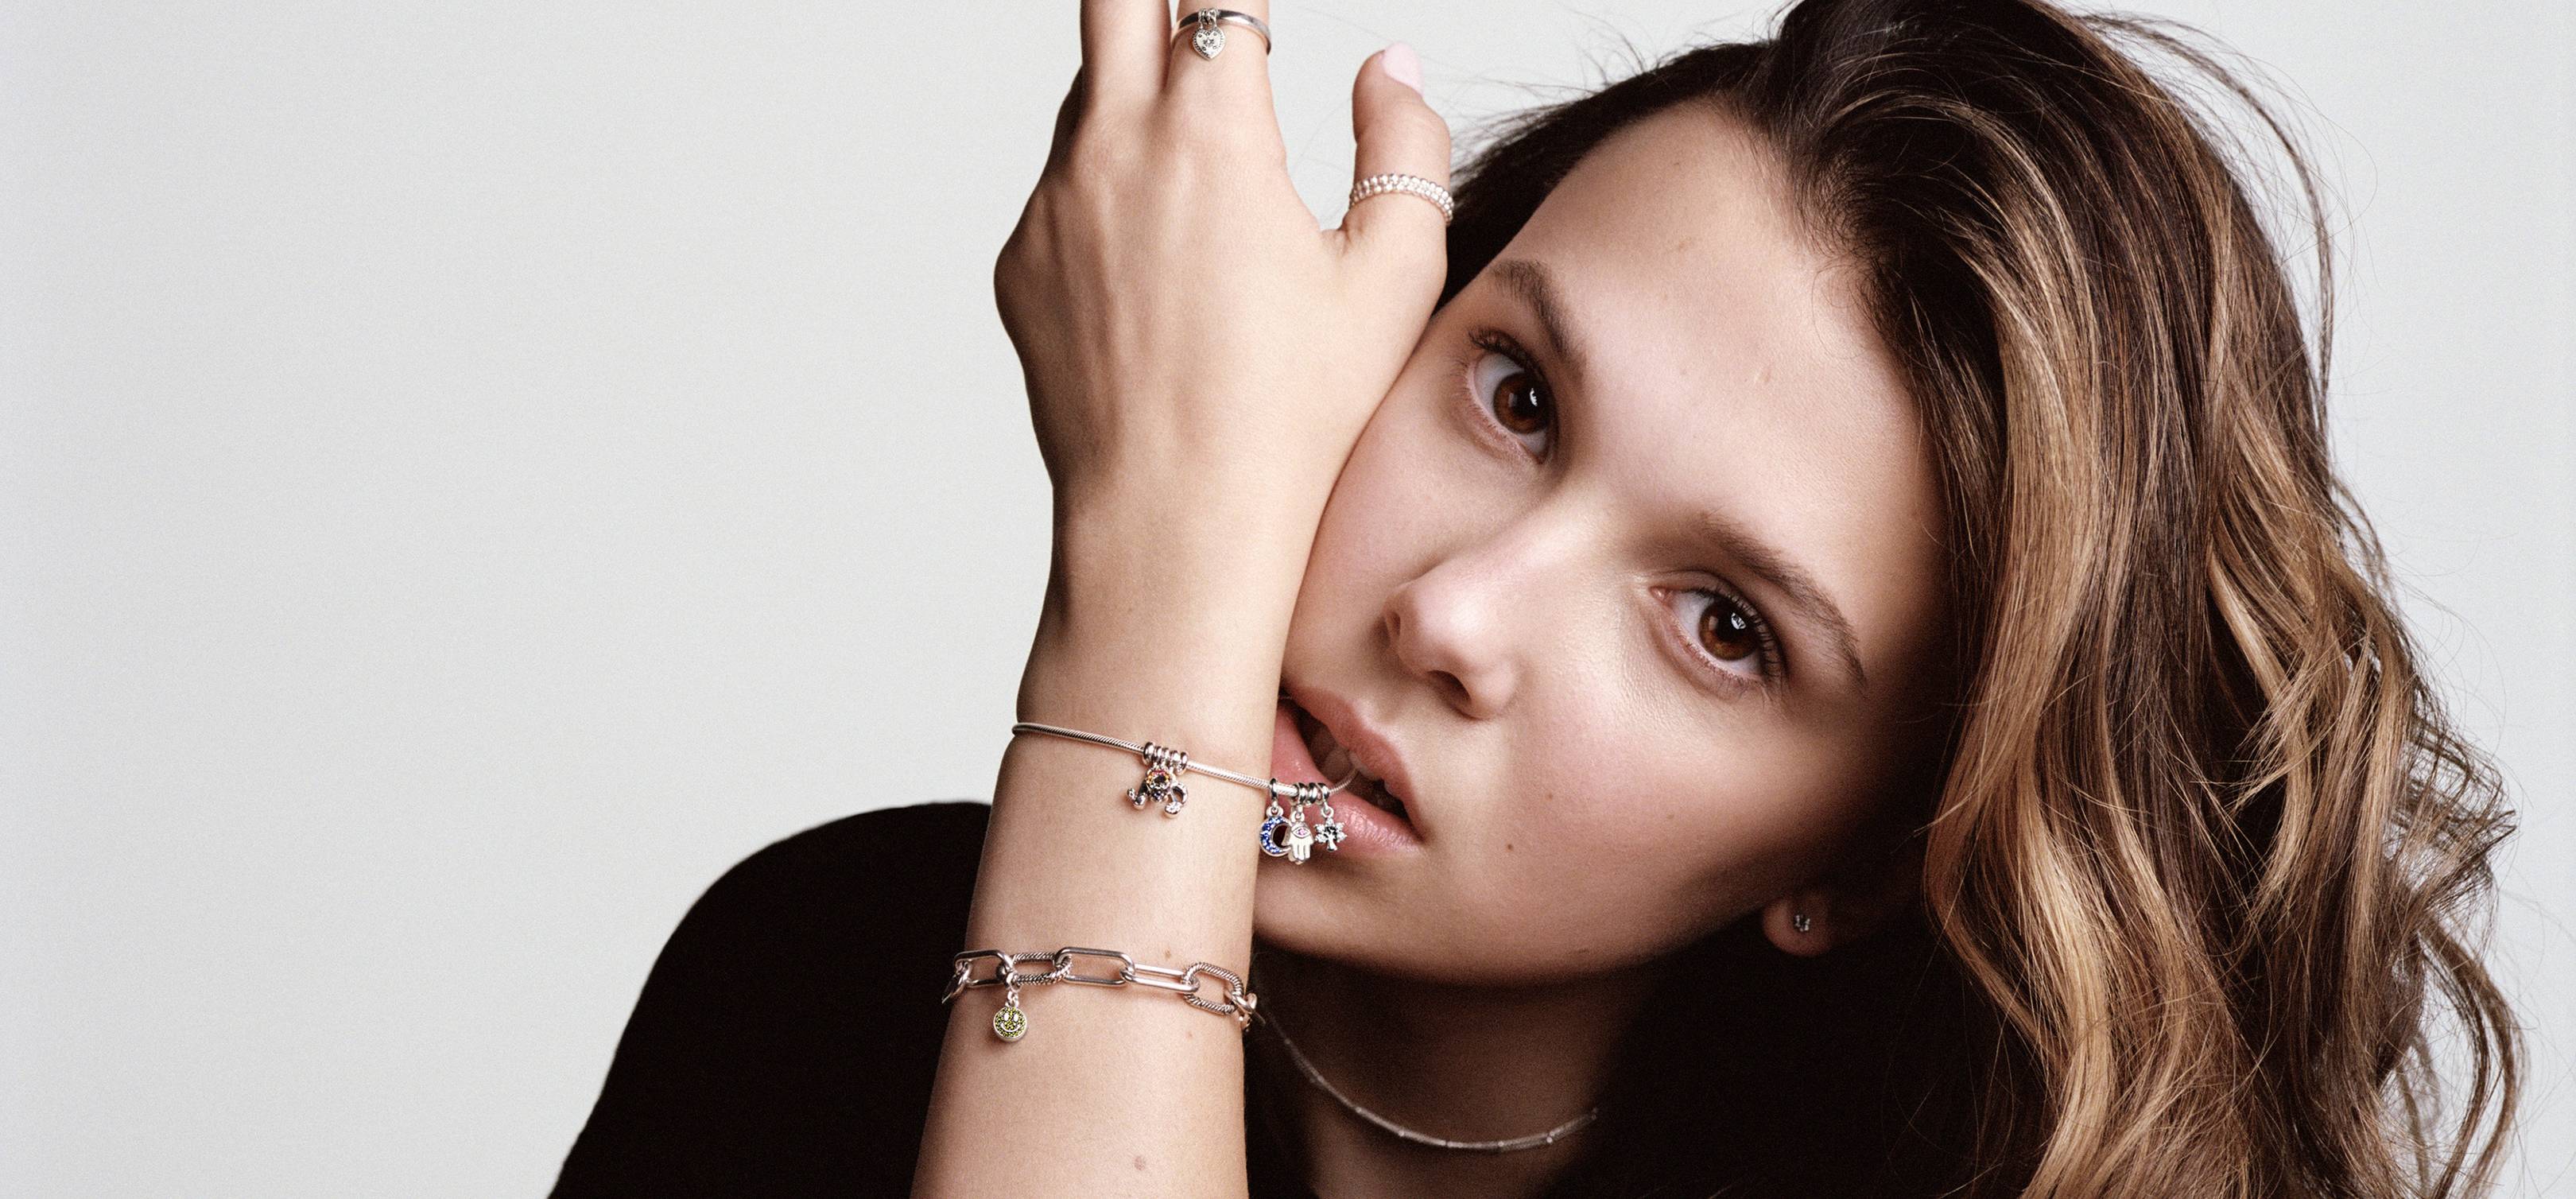 Millie Bobby Brown Is The Face Of The New Pandora Me Campaign ...